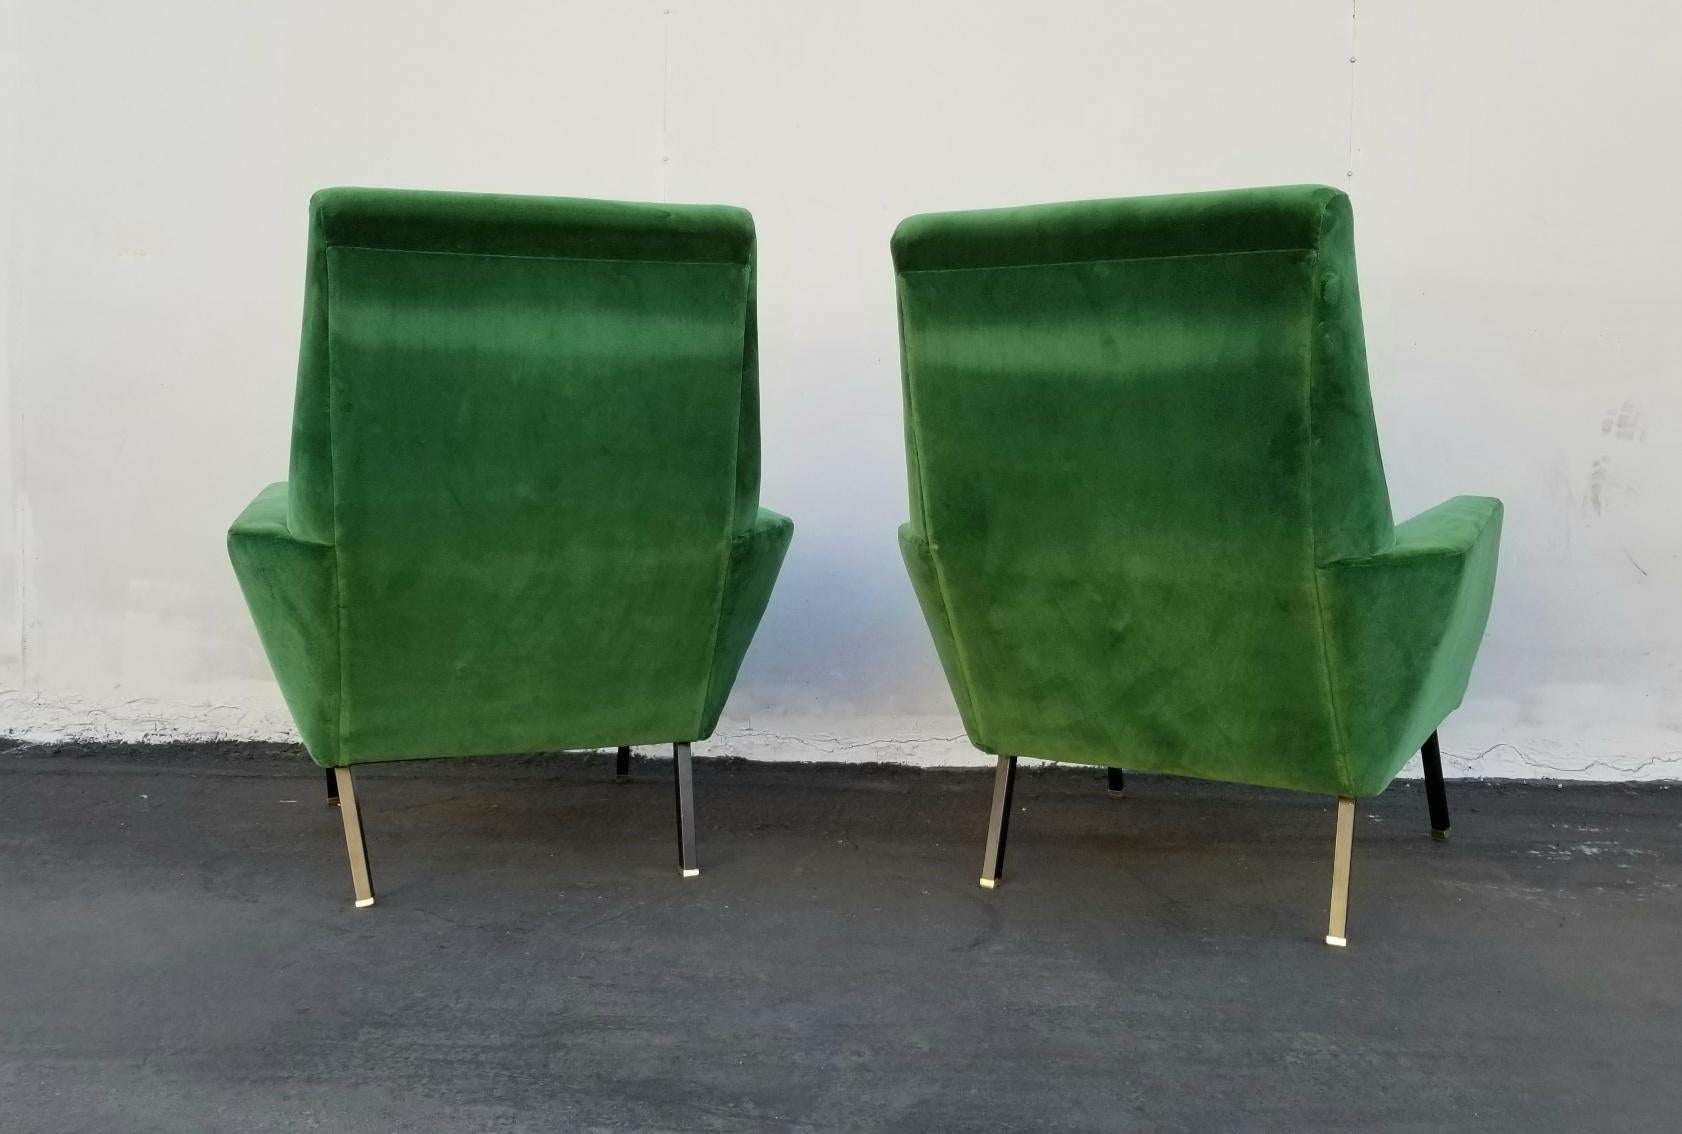 Mid-20th Century Italian, 1950s Lounge Chairs Attributed to Arflex-Meda